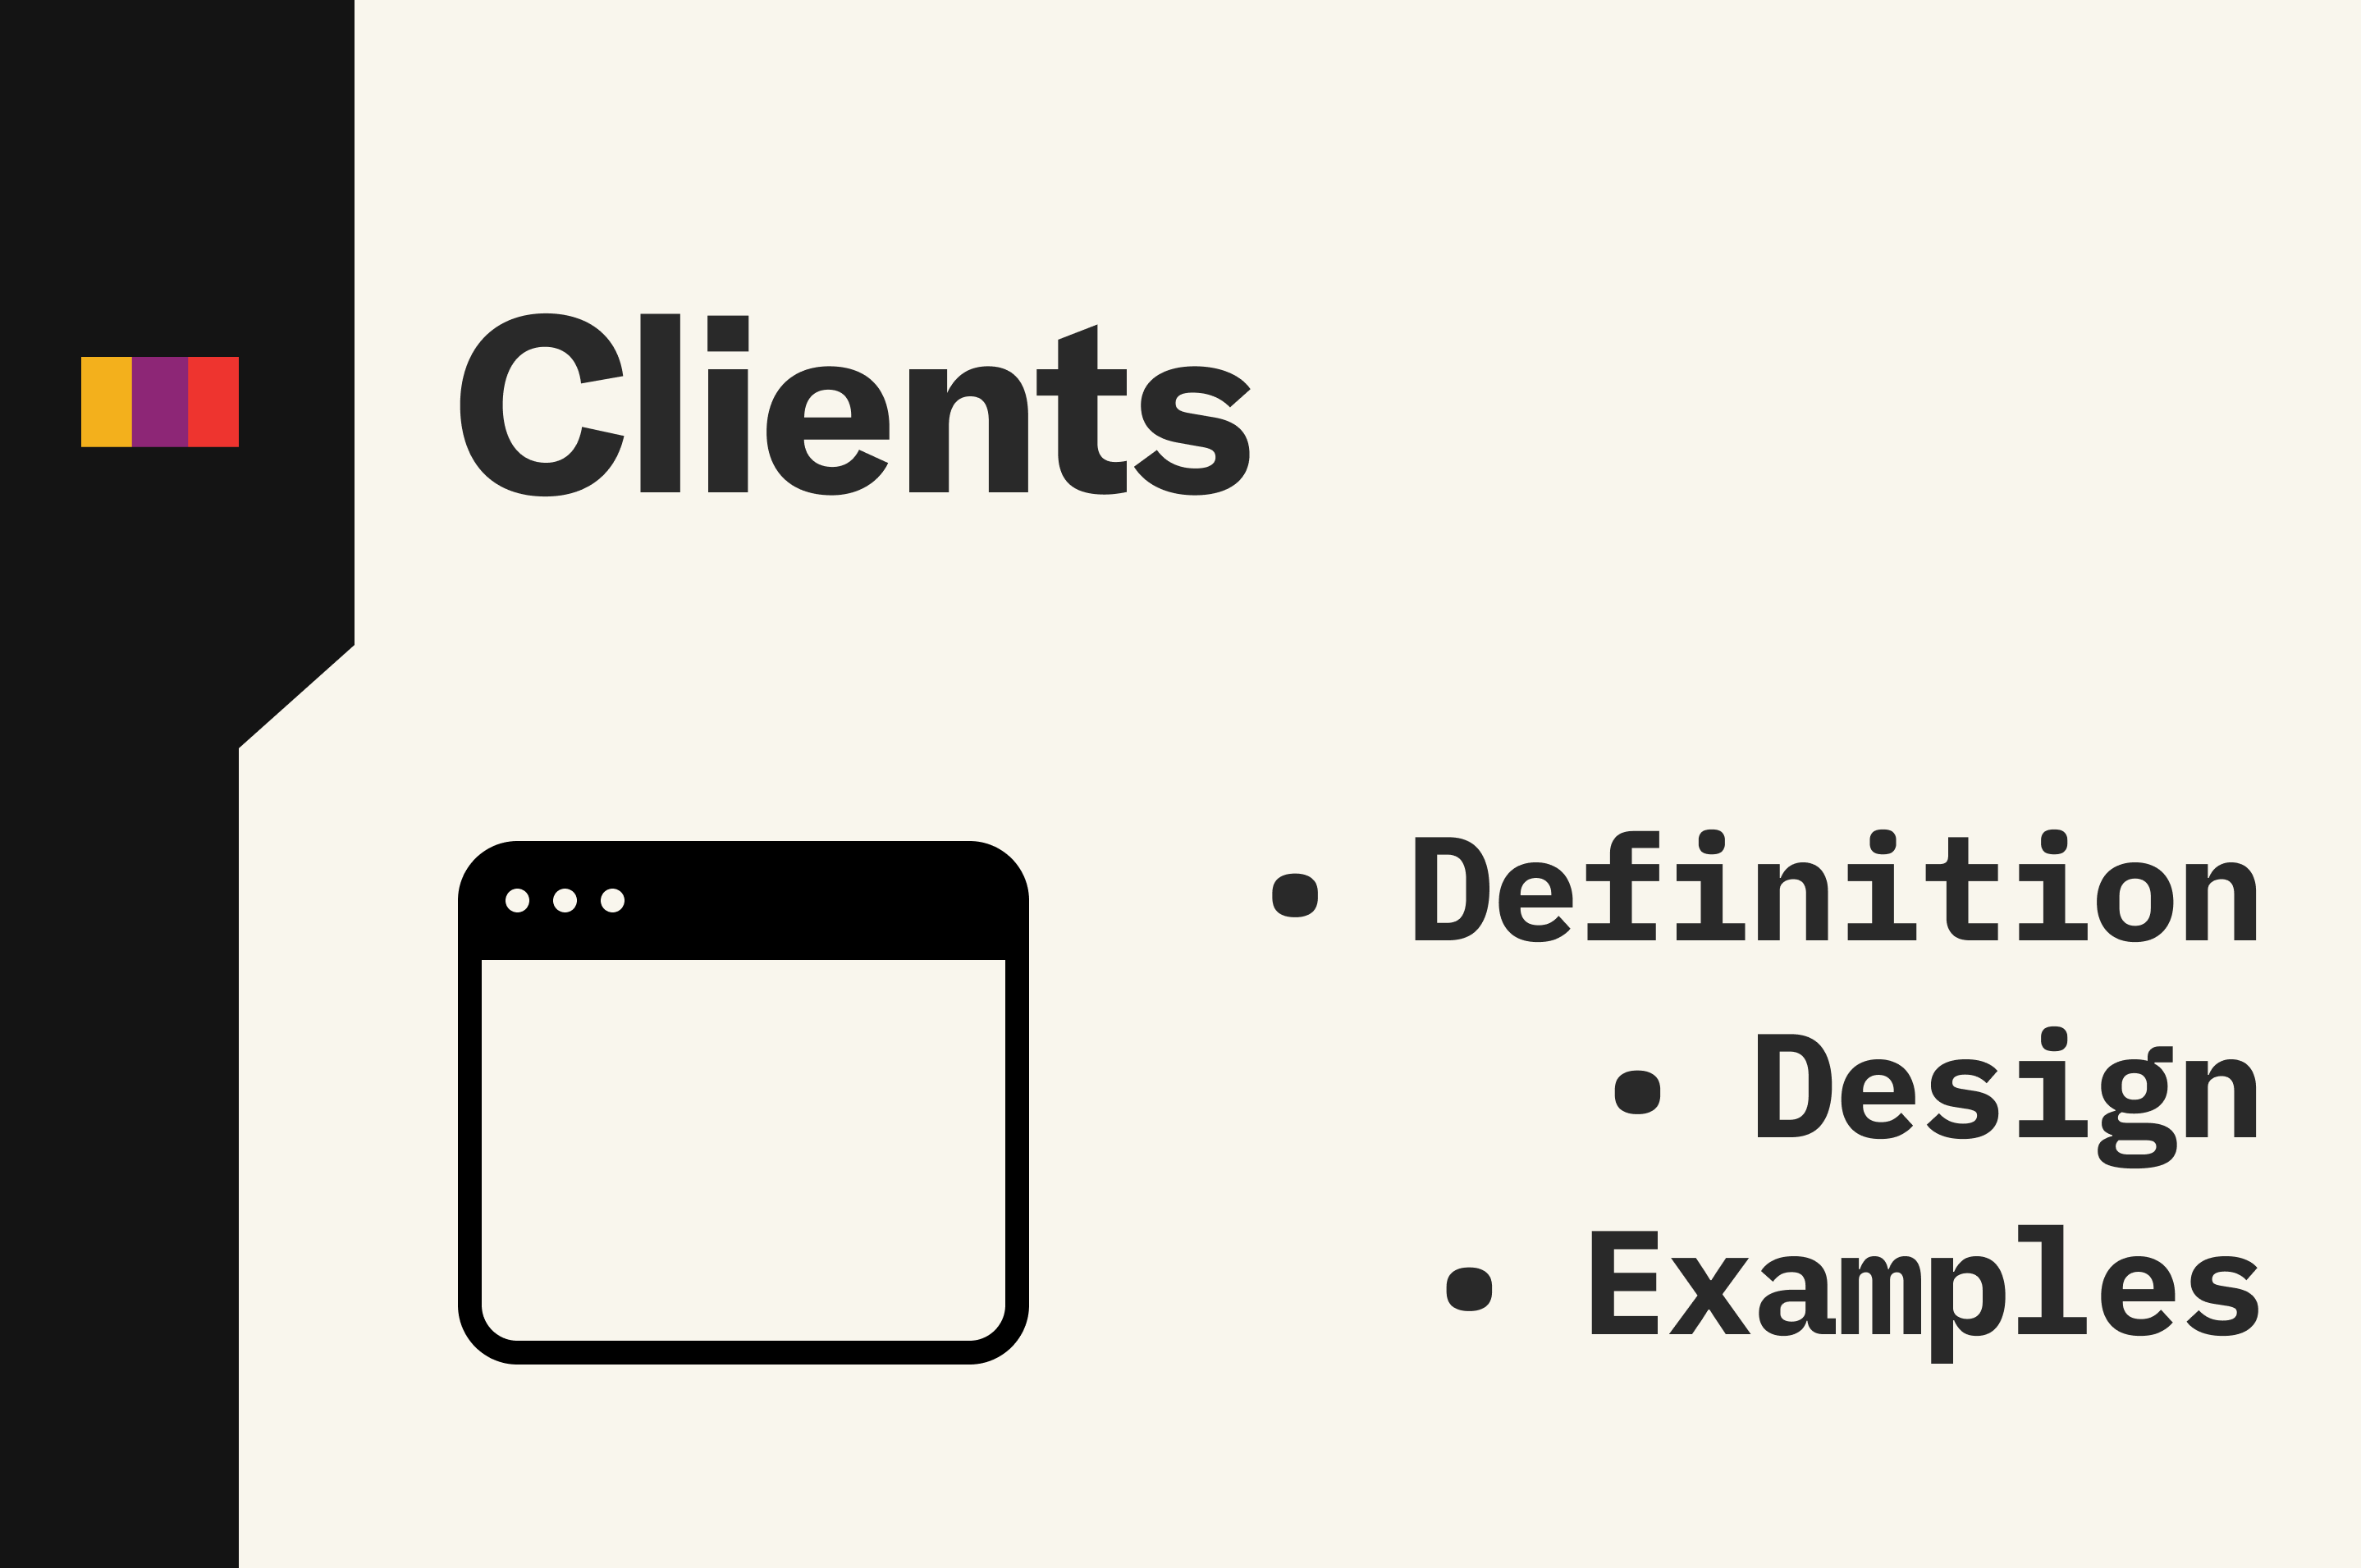 Clients: definition, design, and examples.